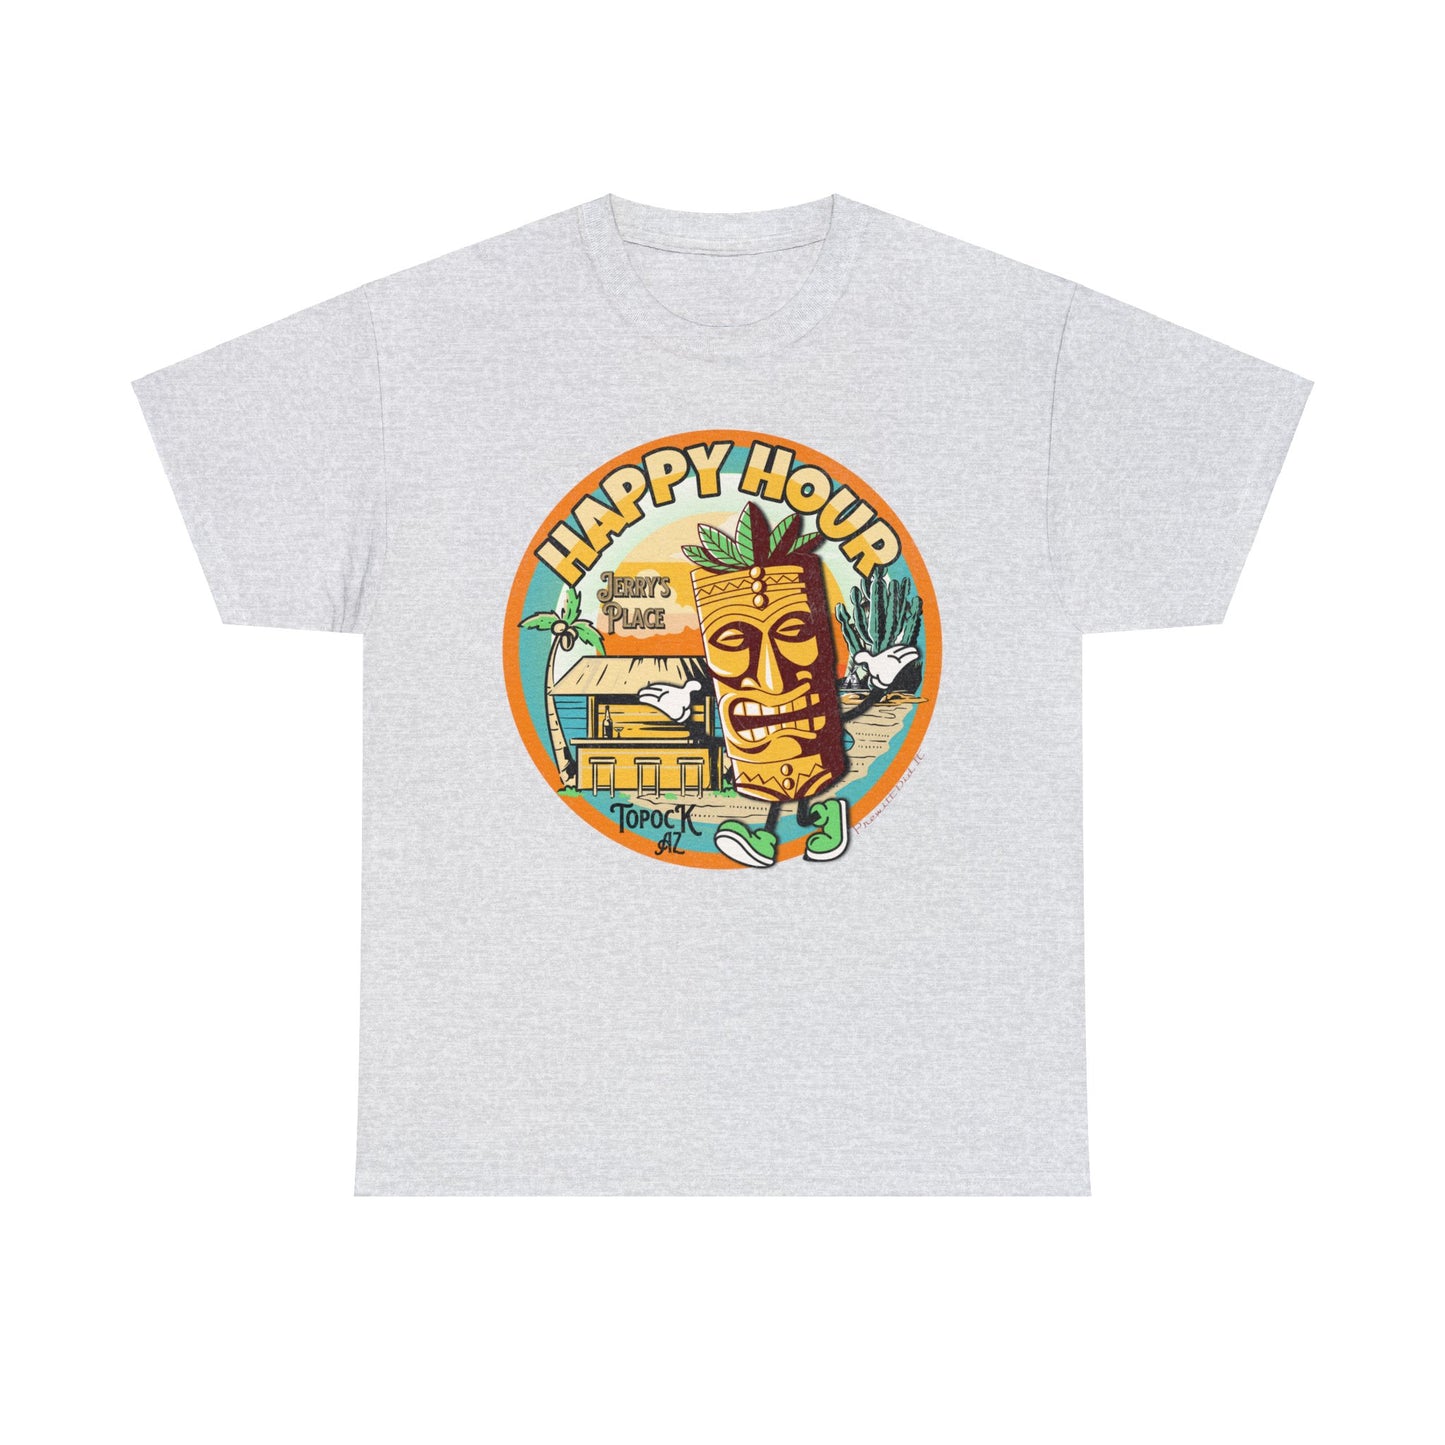 TOPOCK JERRY'S PLACE  ON FRONT Unisex Heavy Cotton Tee